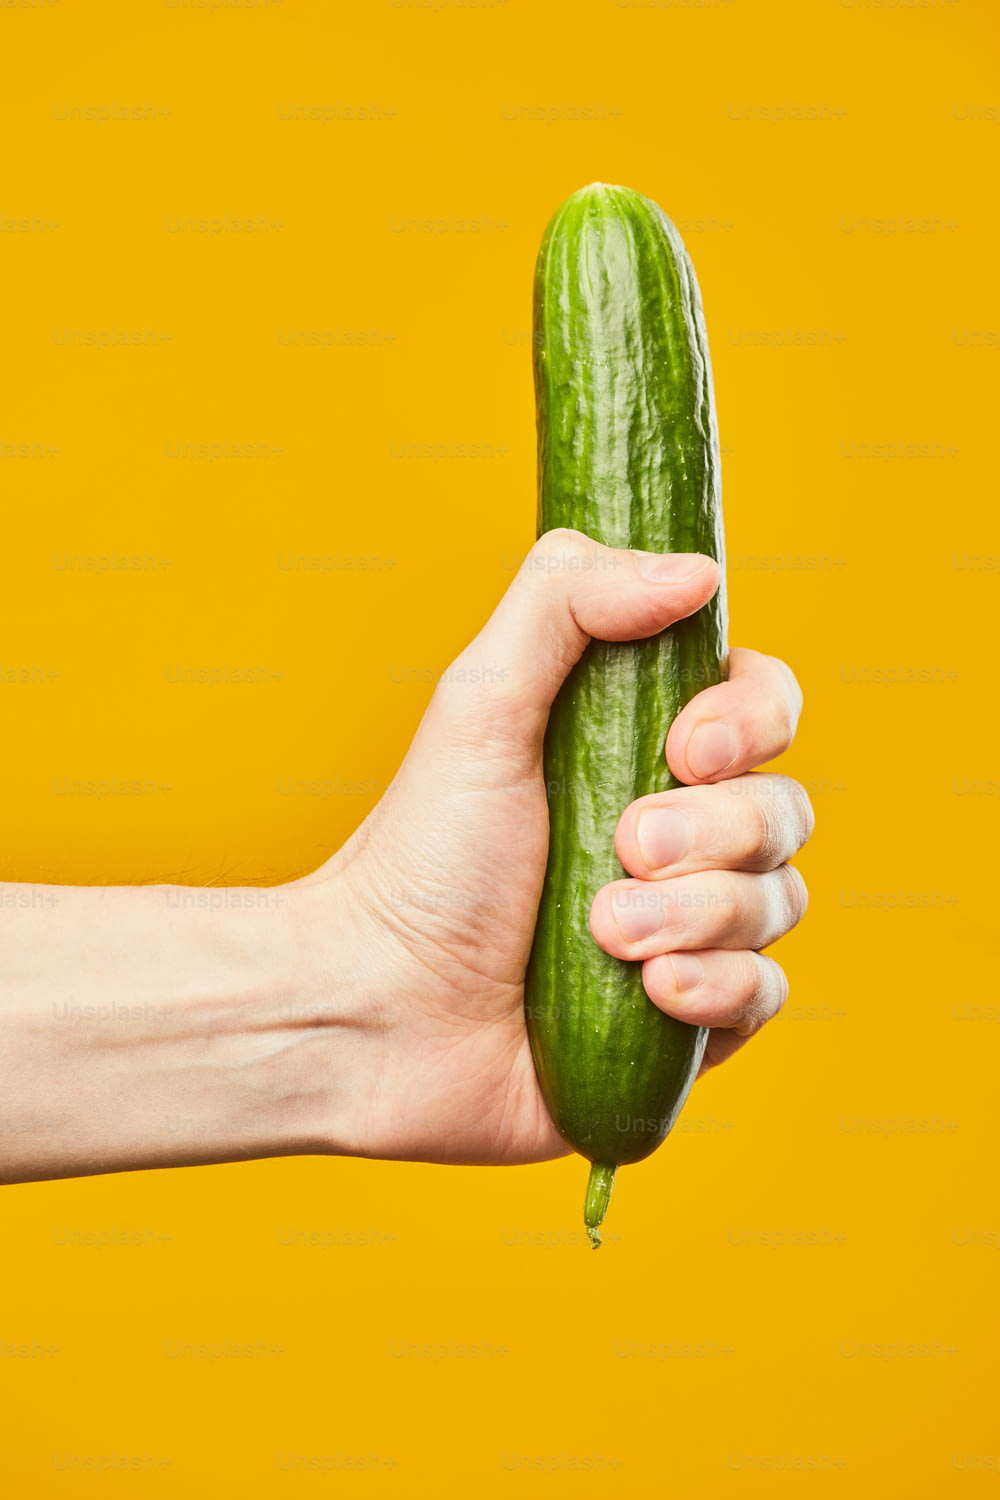 Vibrant shot of hand holding cucumber on yellow background safe sex concept